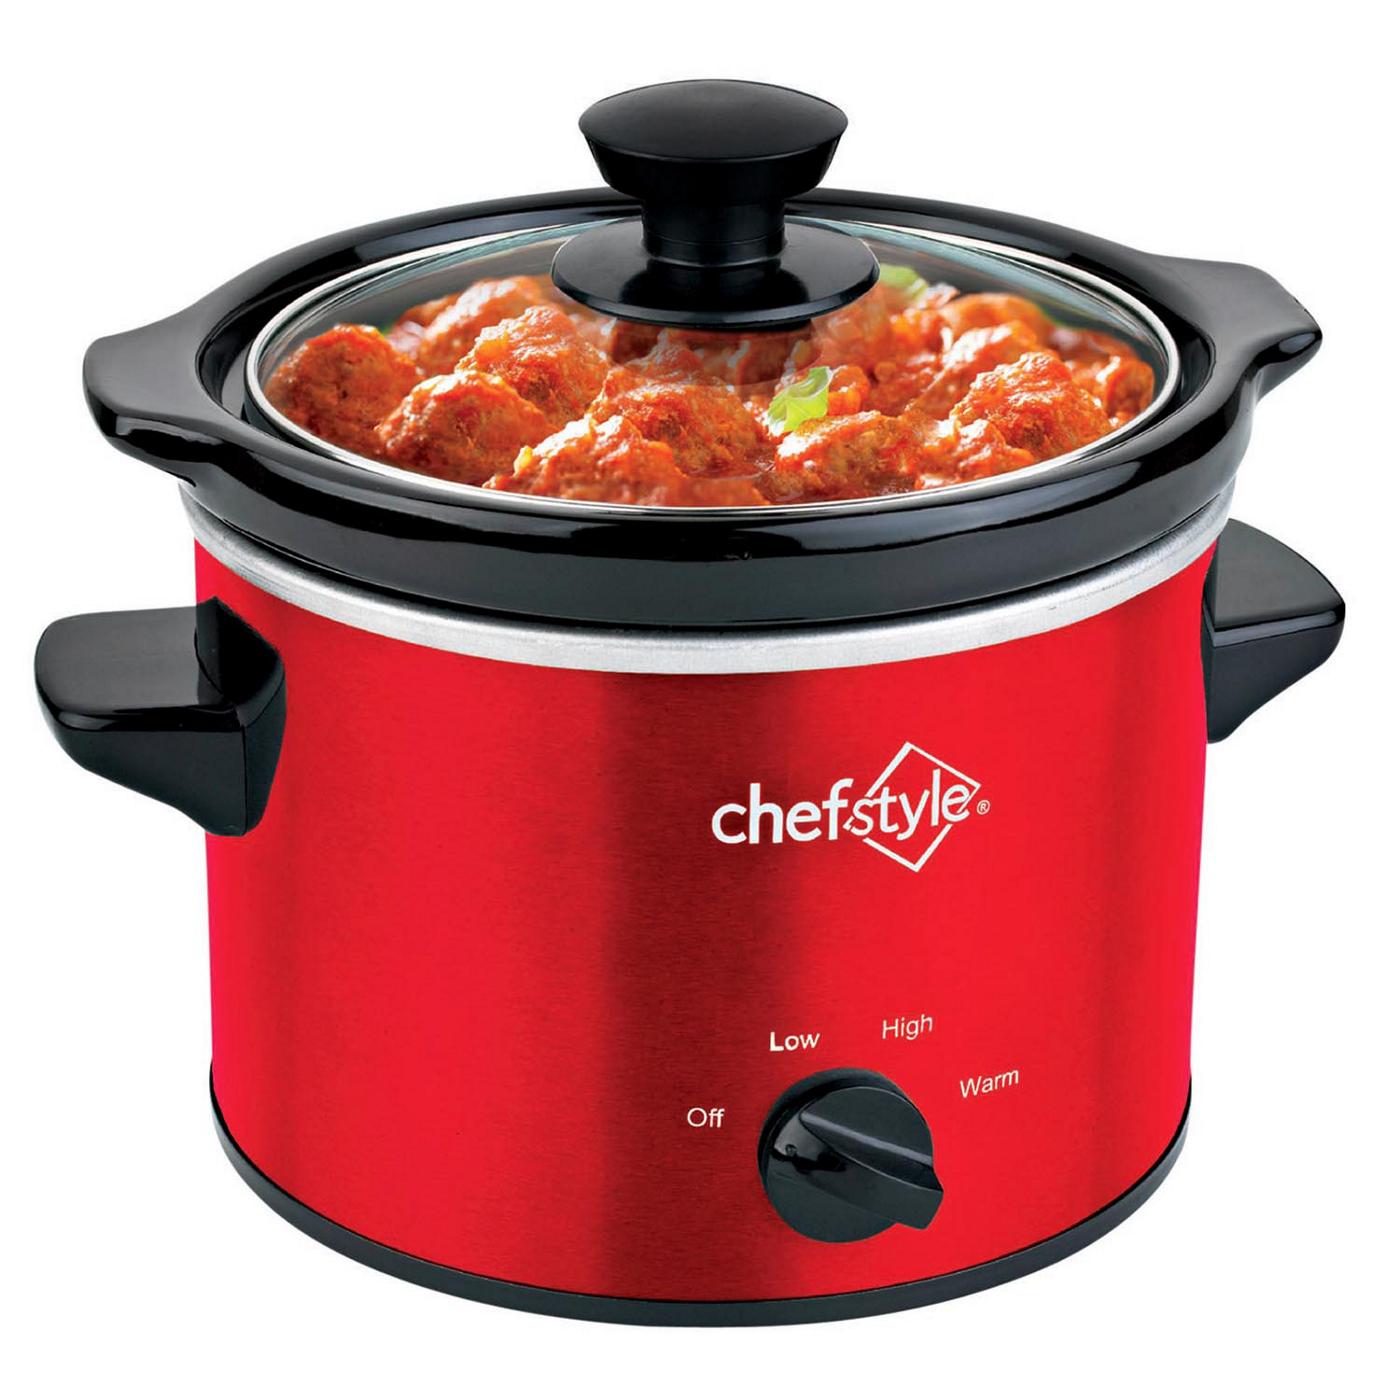 chefstyle Manual Slow Cooker - Red; image 1 of 2